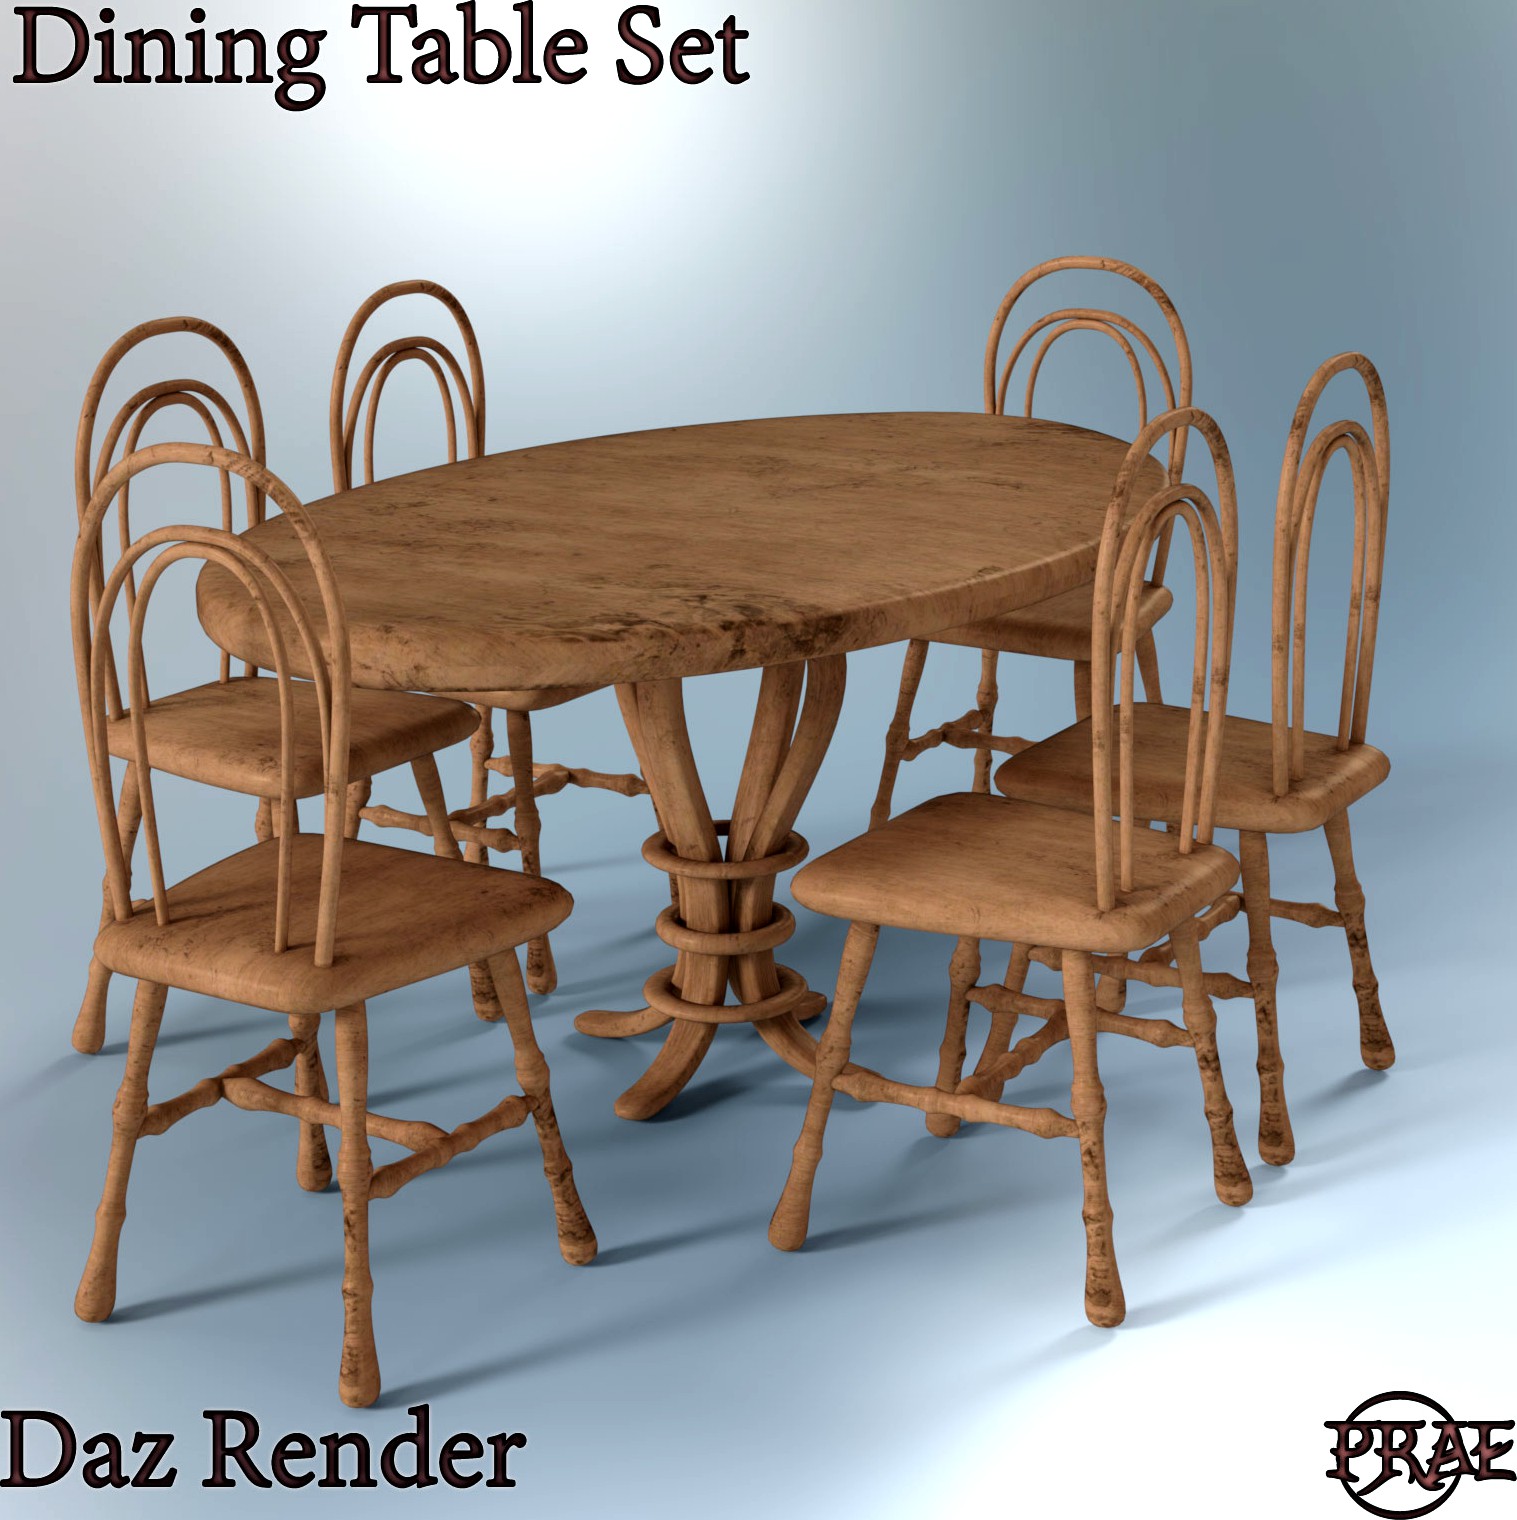 Prae-Dining Table Set EXTENDED LICENCE